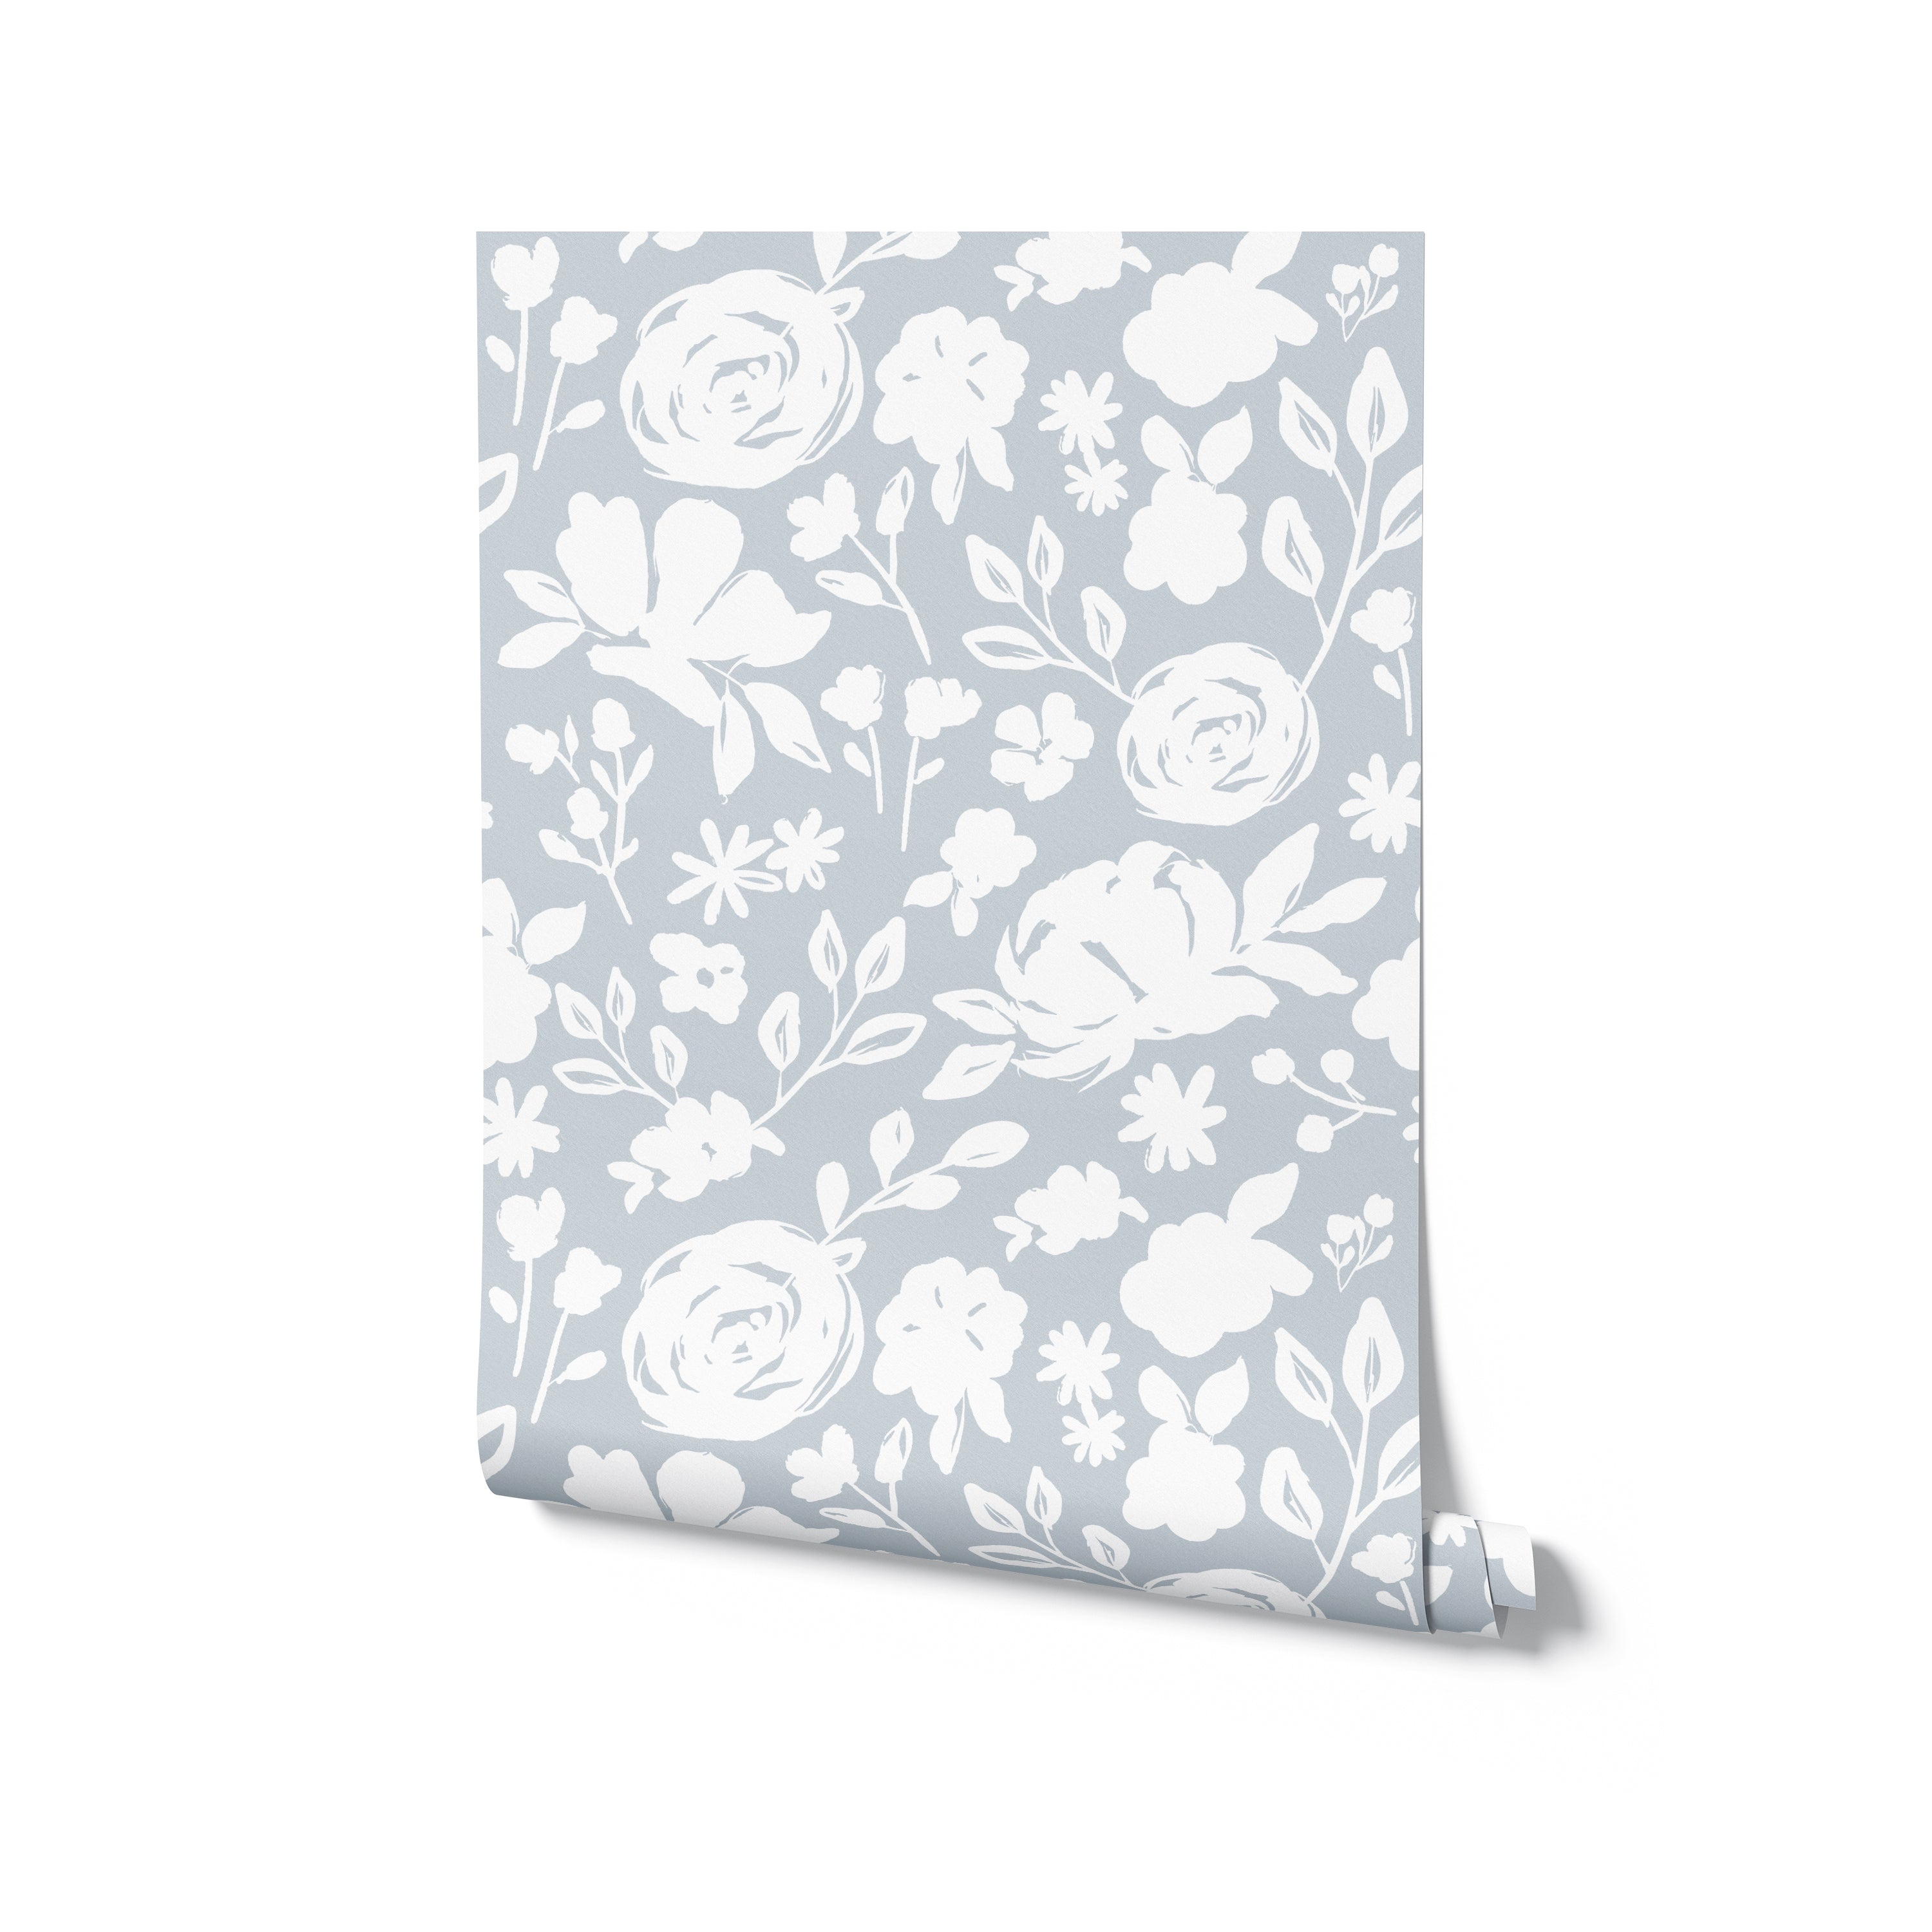 Roll of pale blue floral silhouette wallpaper, slightly unrolled to display the intricate white floral patterns on a soft blue background. This wallpaper offers a refined and airy feel, ideal for creating a light and inviting space in any home.